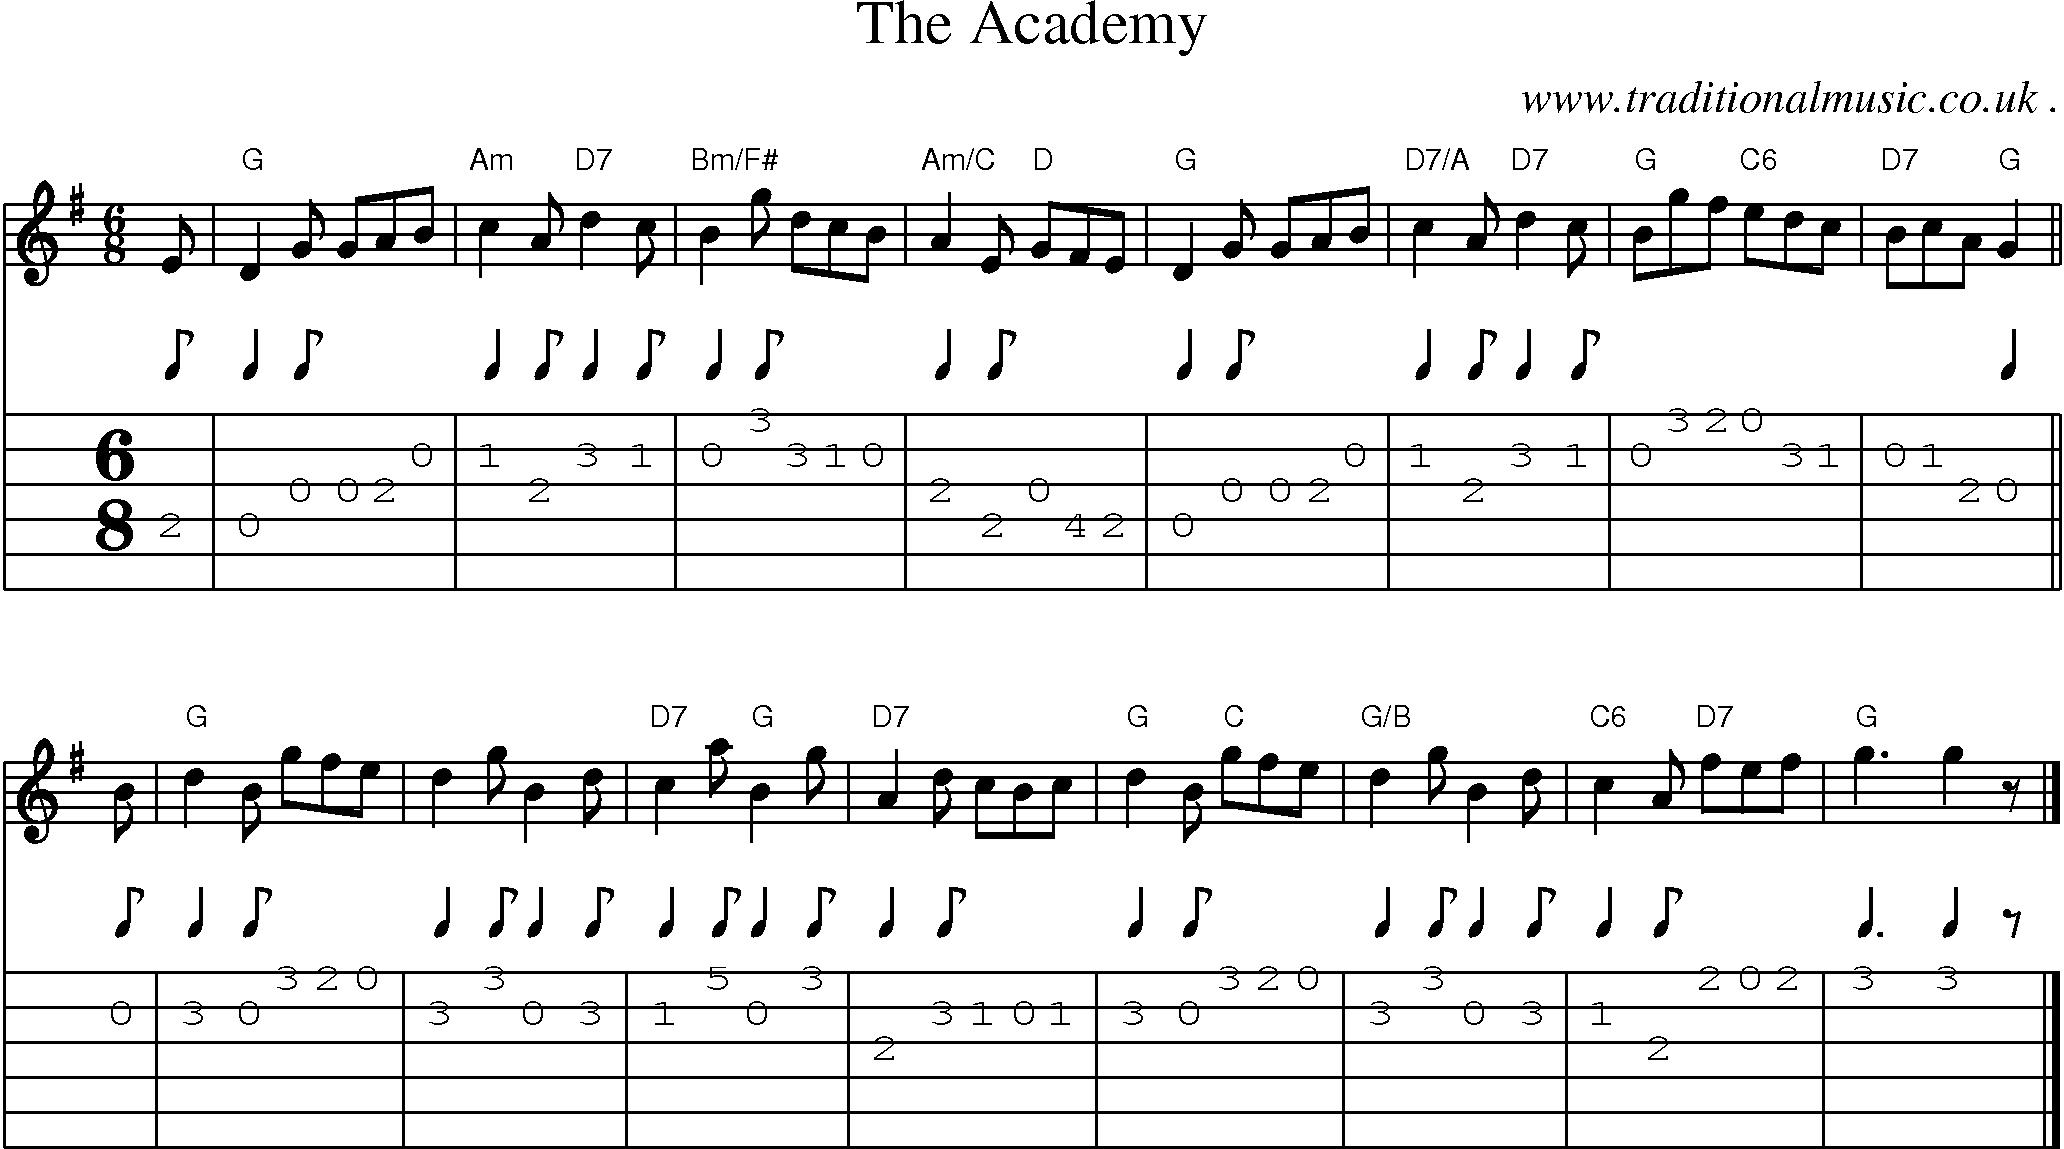 Sheet-music  score, Chords and Guitar Tabs for The Academy